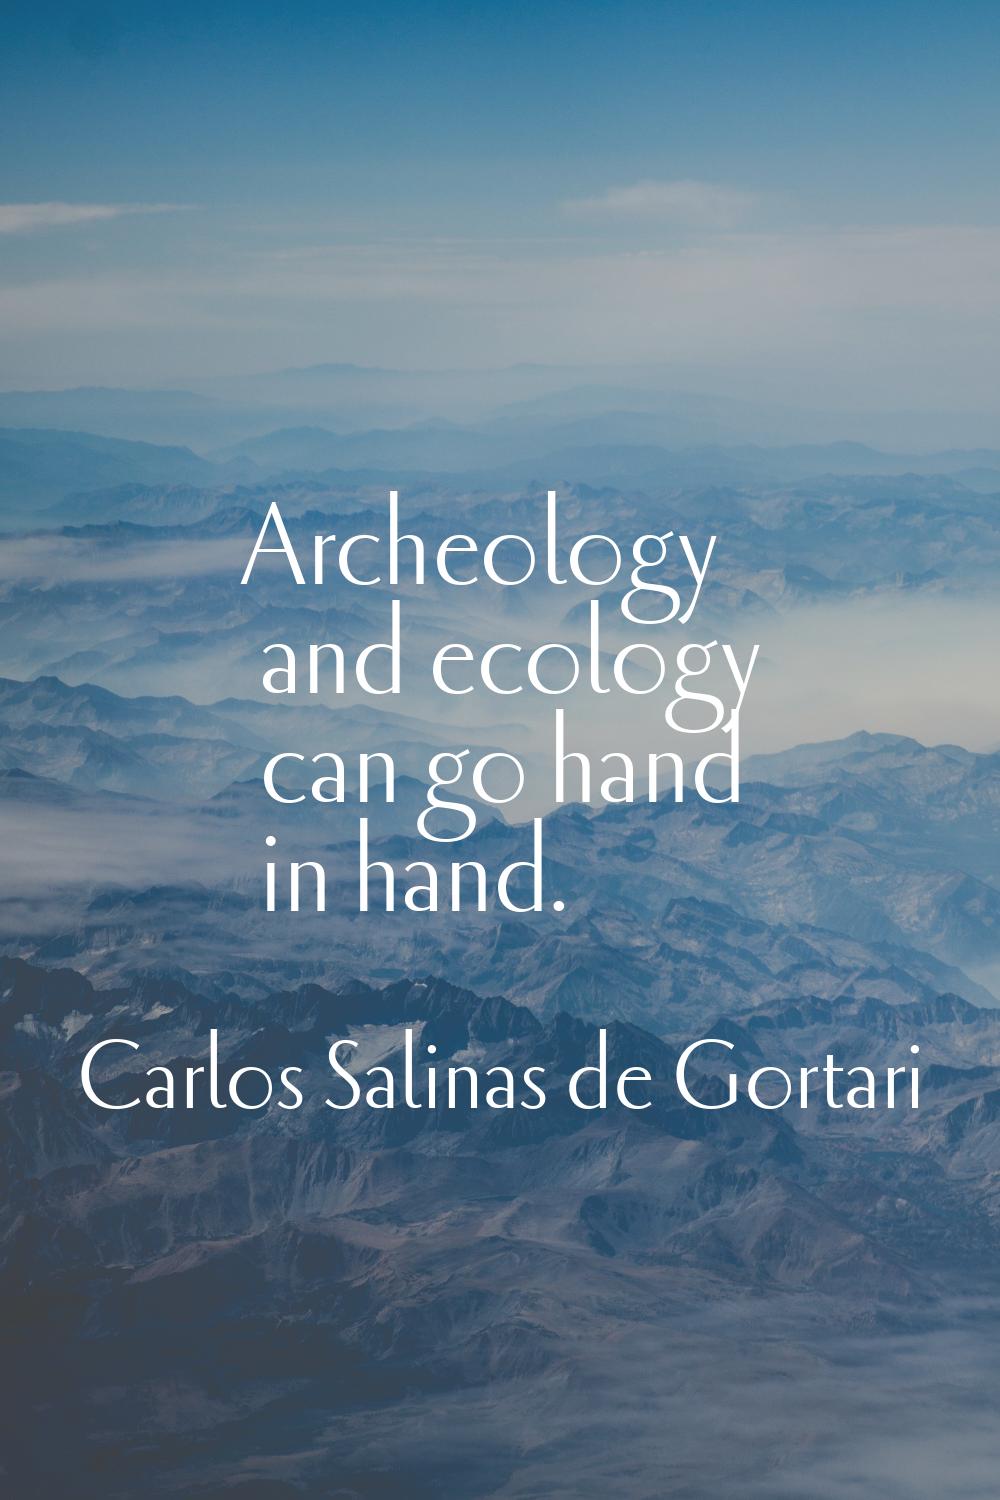 Archeology and ecology can go hand in hand.